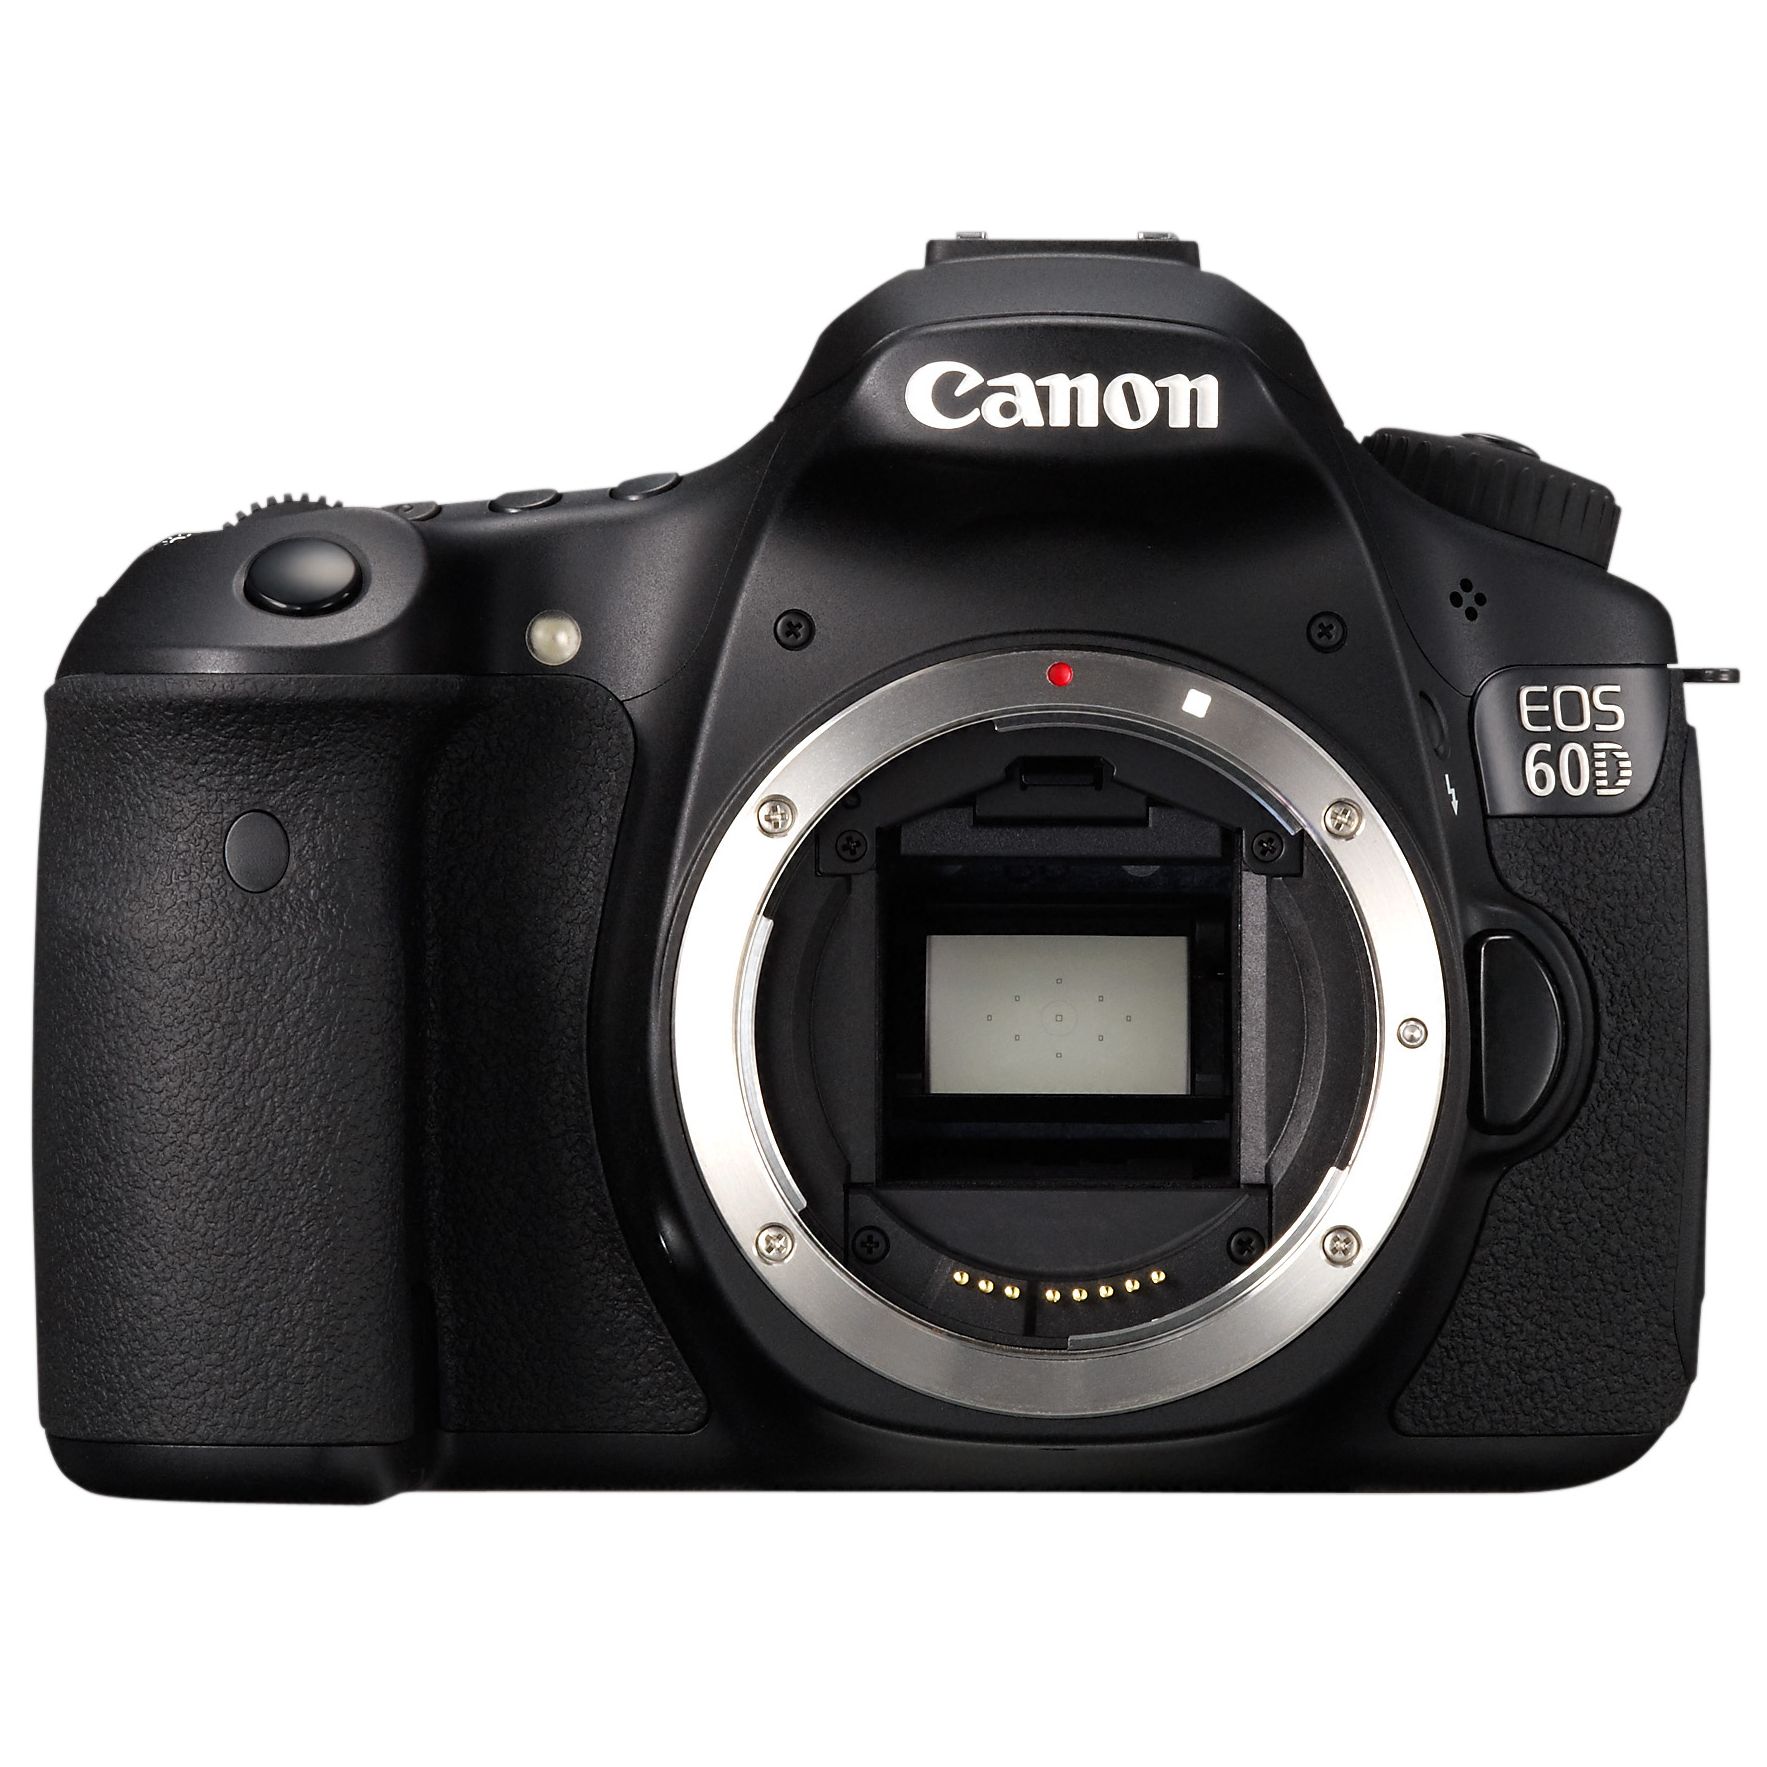 Canon EOS 60D Digital SLR Camera, Body Only at John Lewis